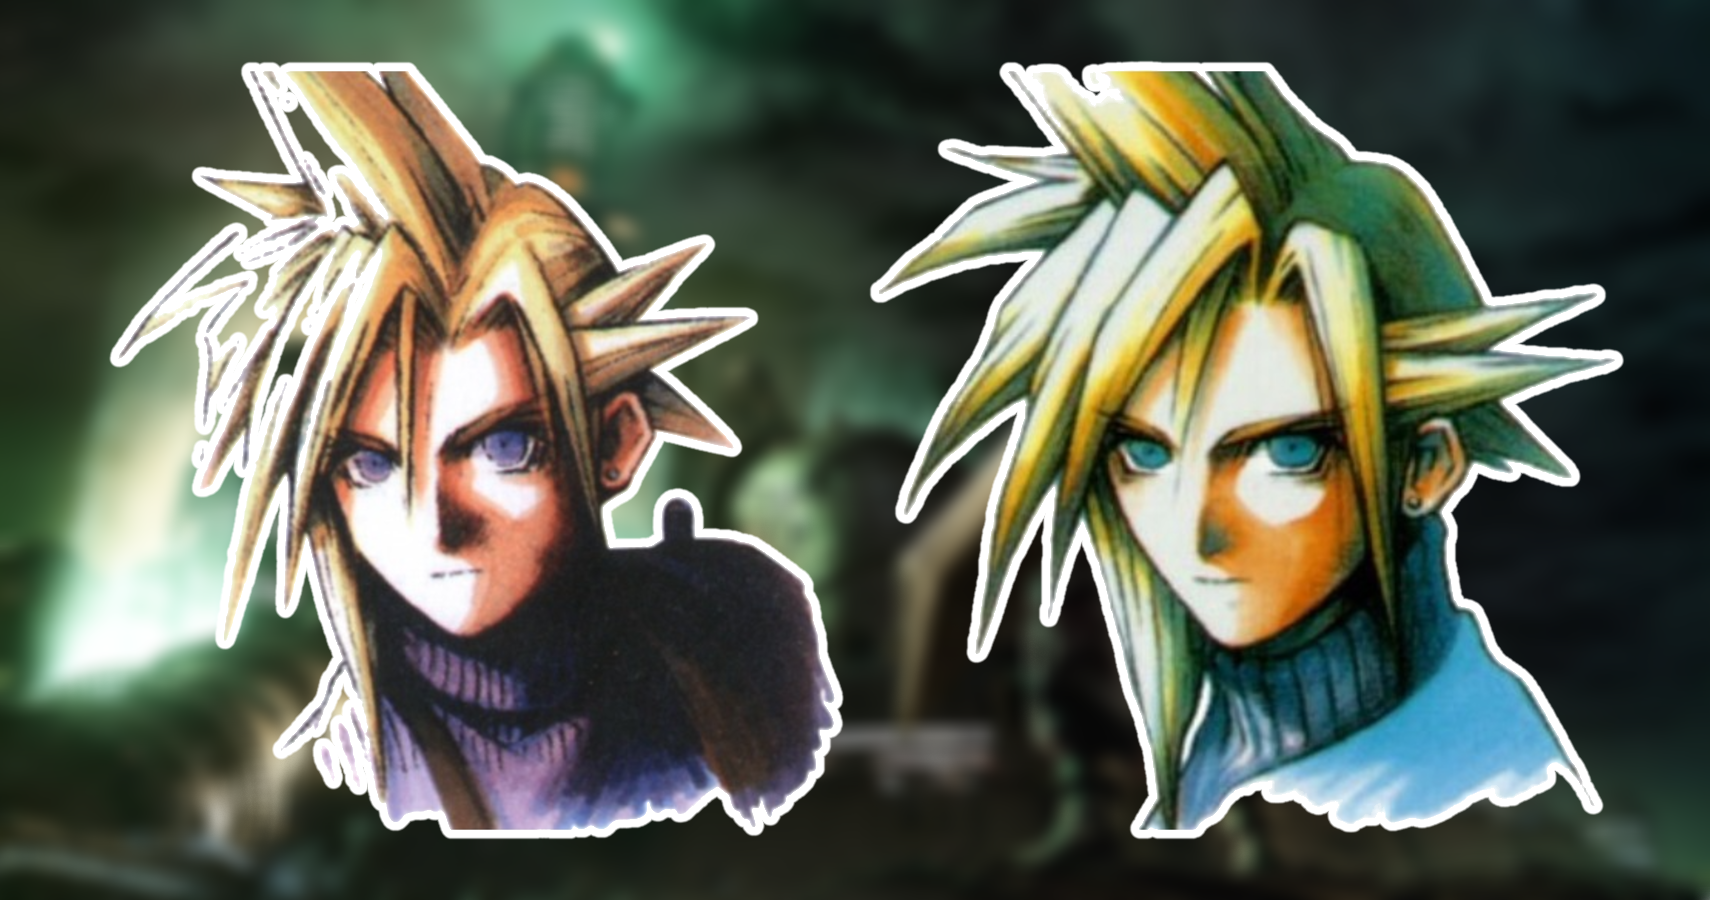 Two pictures of Cloud Strife from Final Fantasy 7 are overlaid over Midgard,